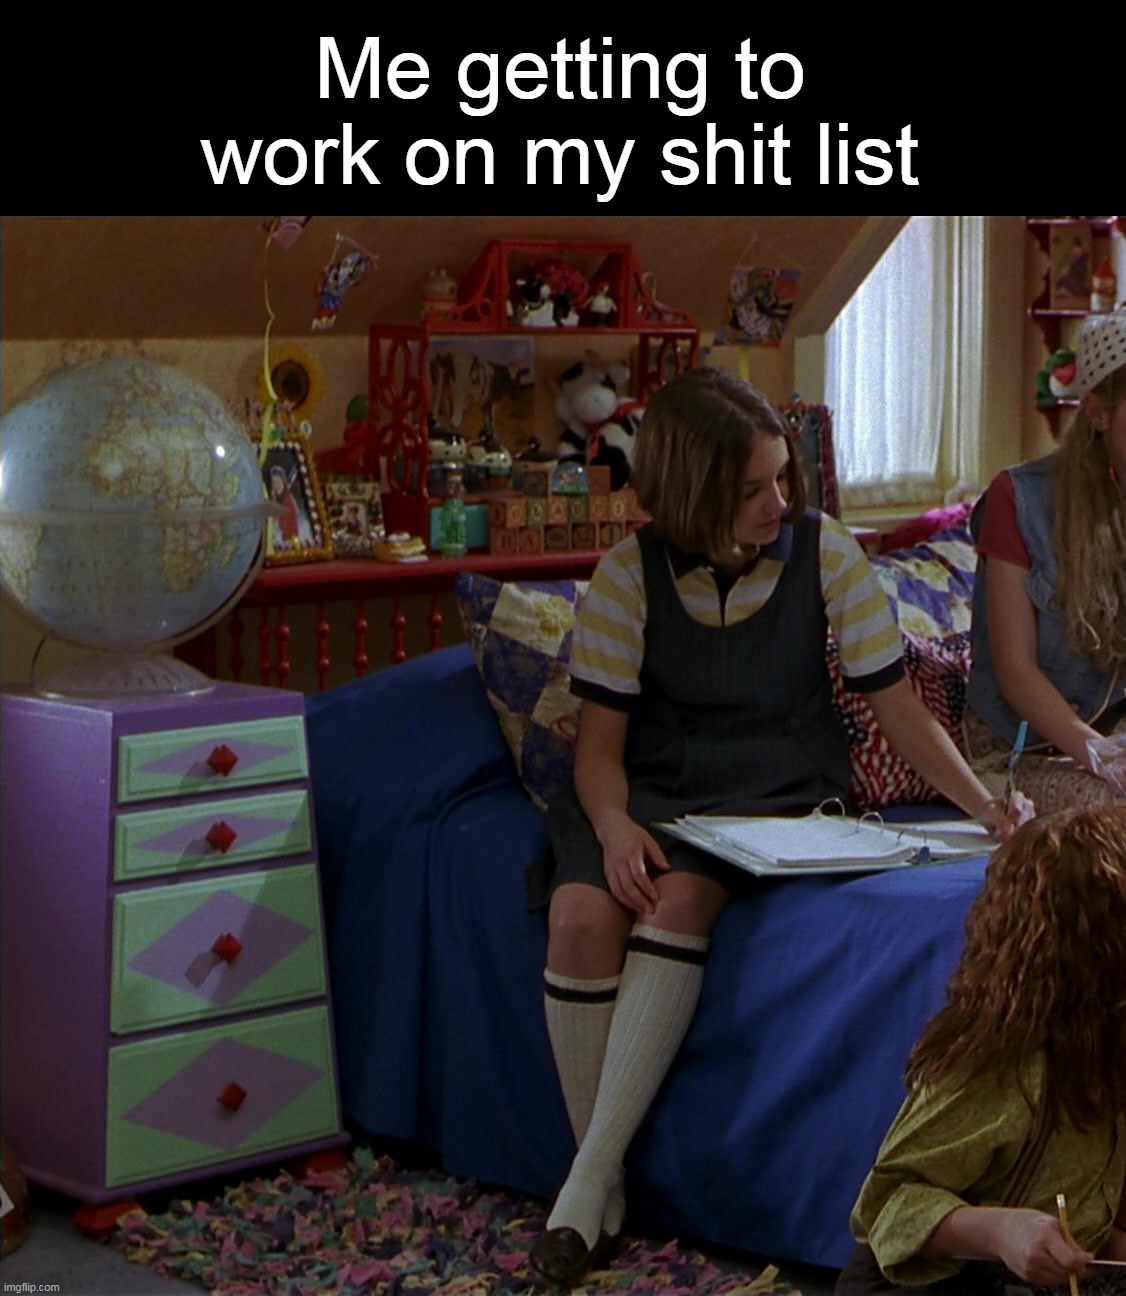 Me getting to work on my shit list | image tagged in meme,memes,funny,relatable,humor | made w/ Imgflip meme maker